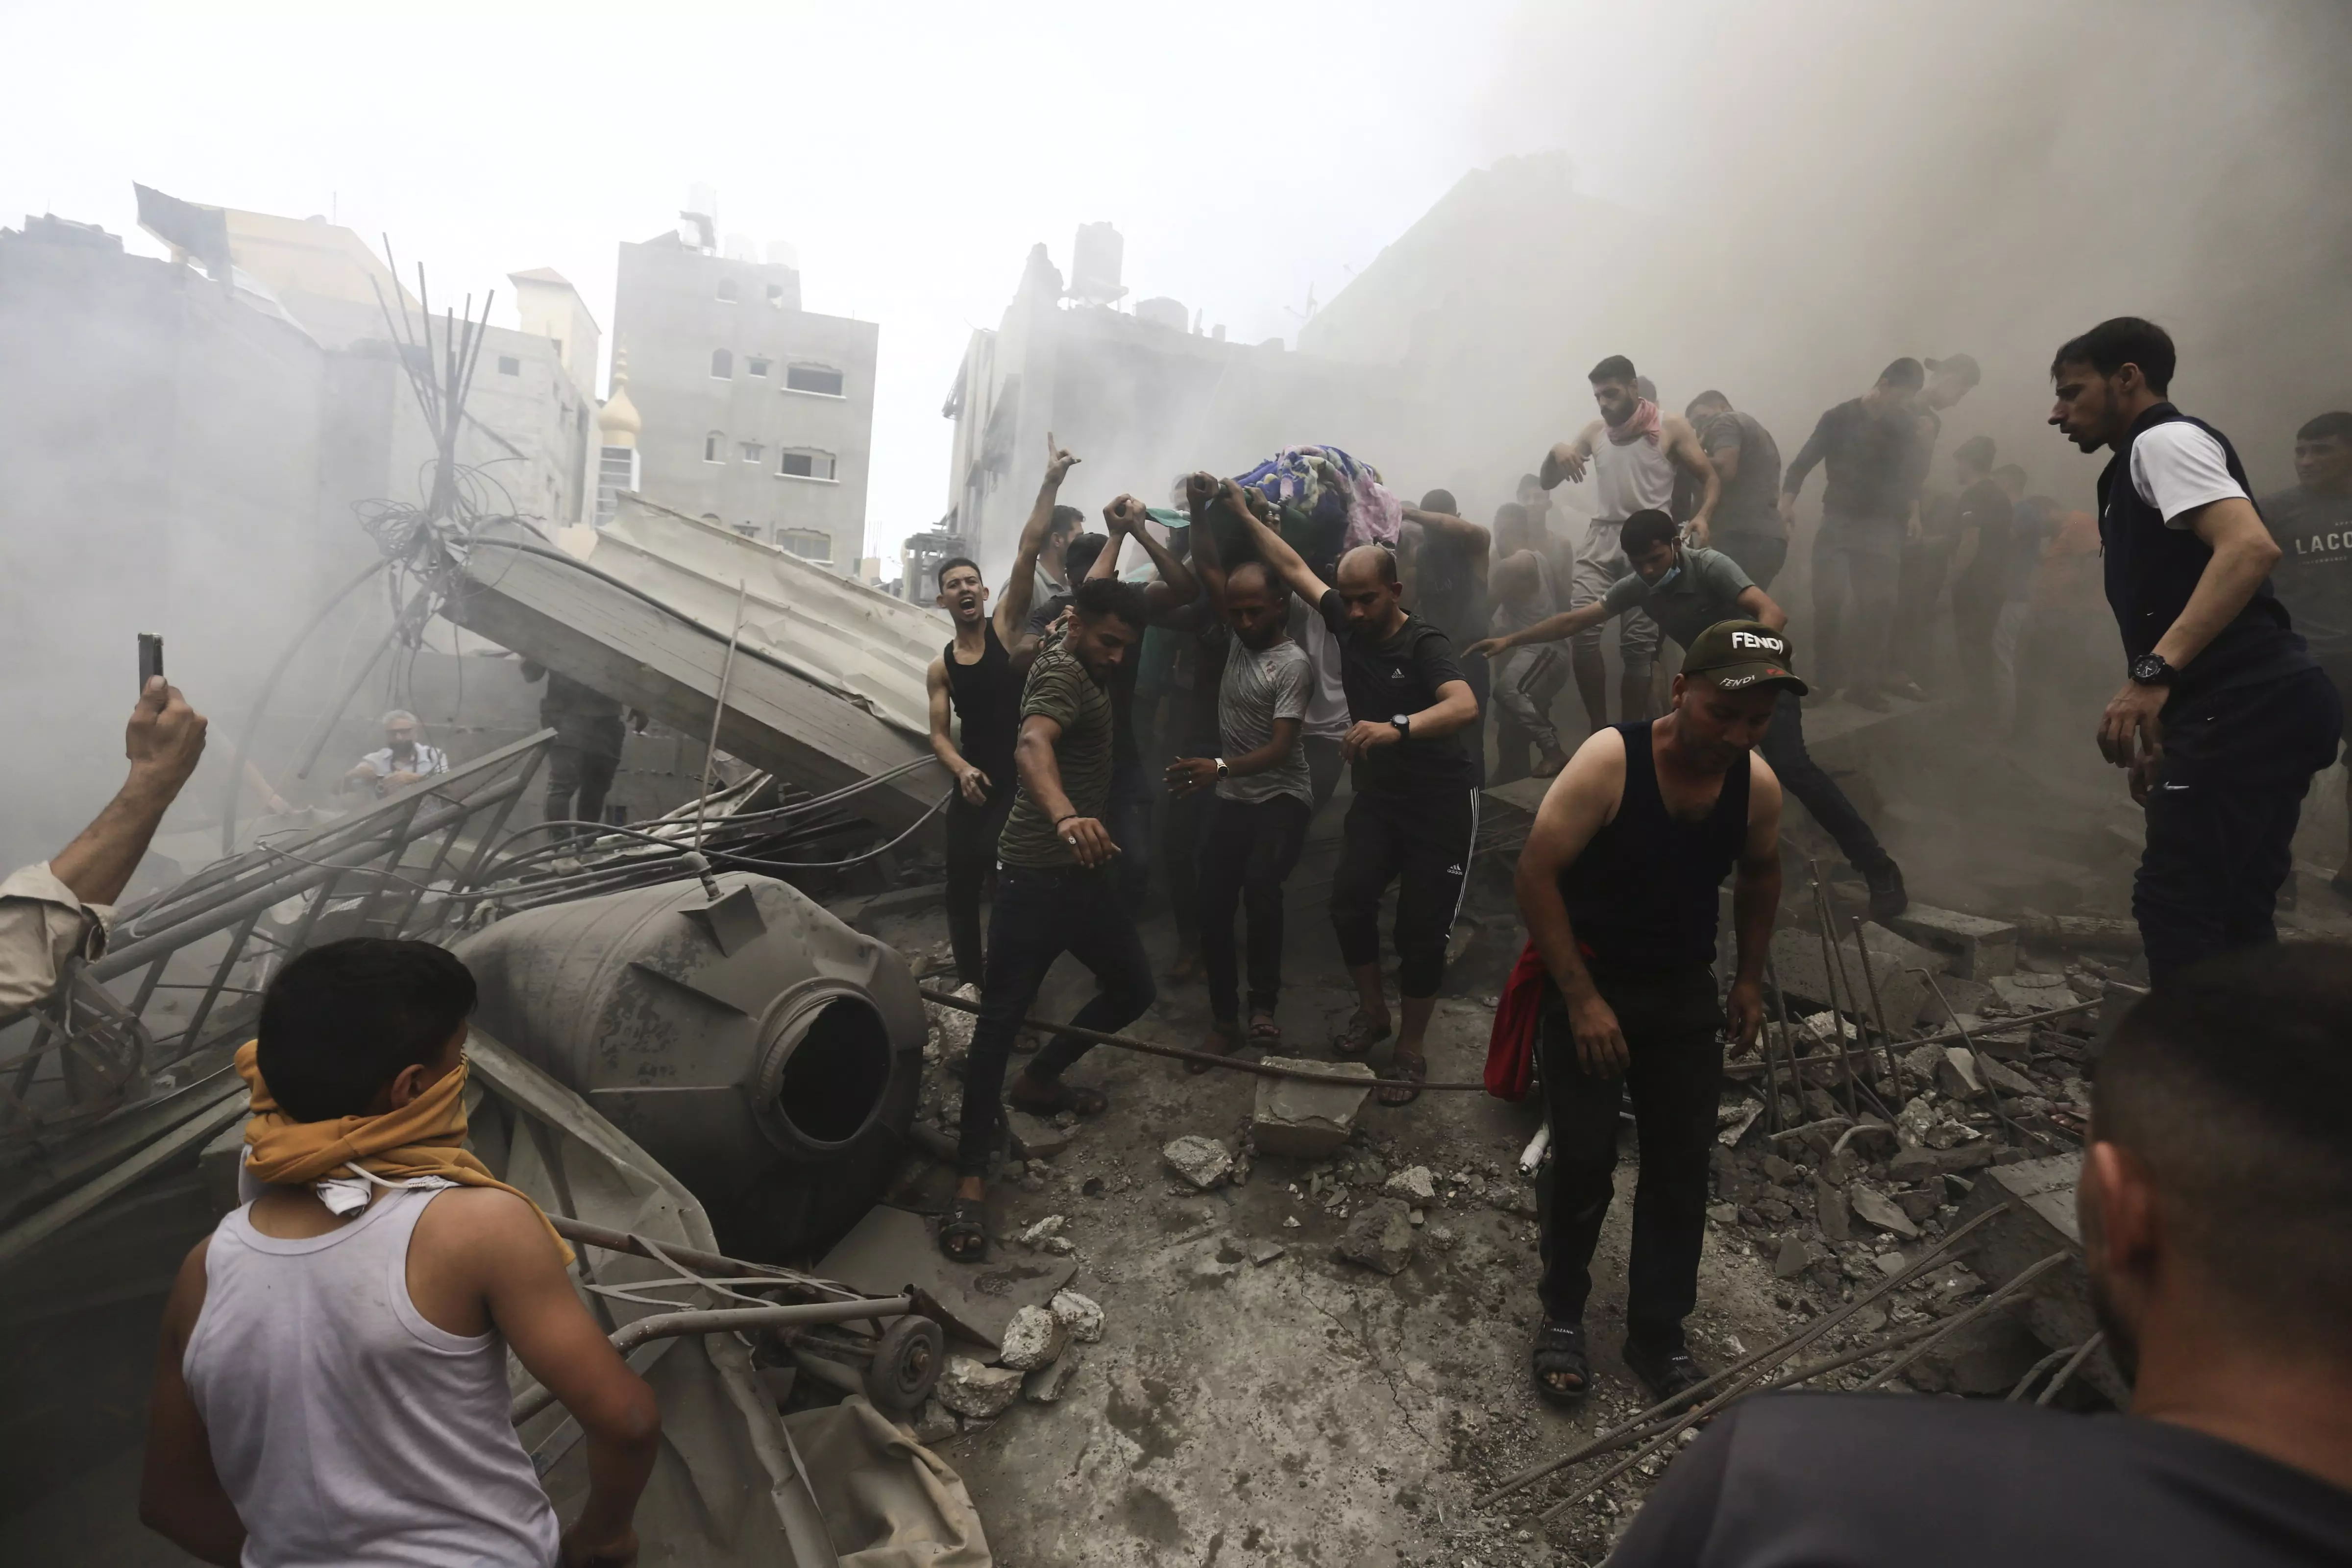 Palestinians remove a body from the rubble of a building after an Israeli airstrike in Jebaliya refugee camp, Gaza strip on Monday. Photo: PTI  